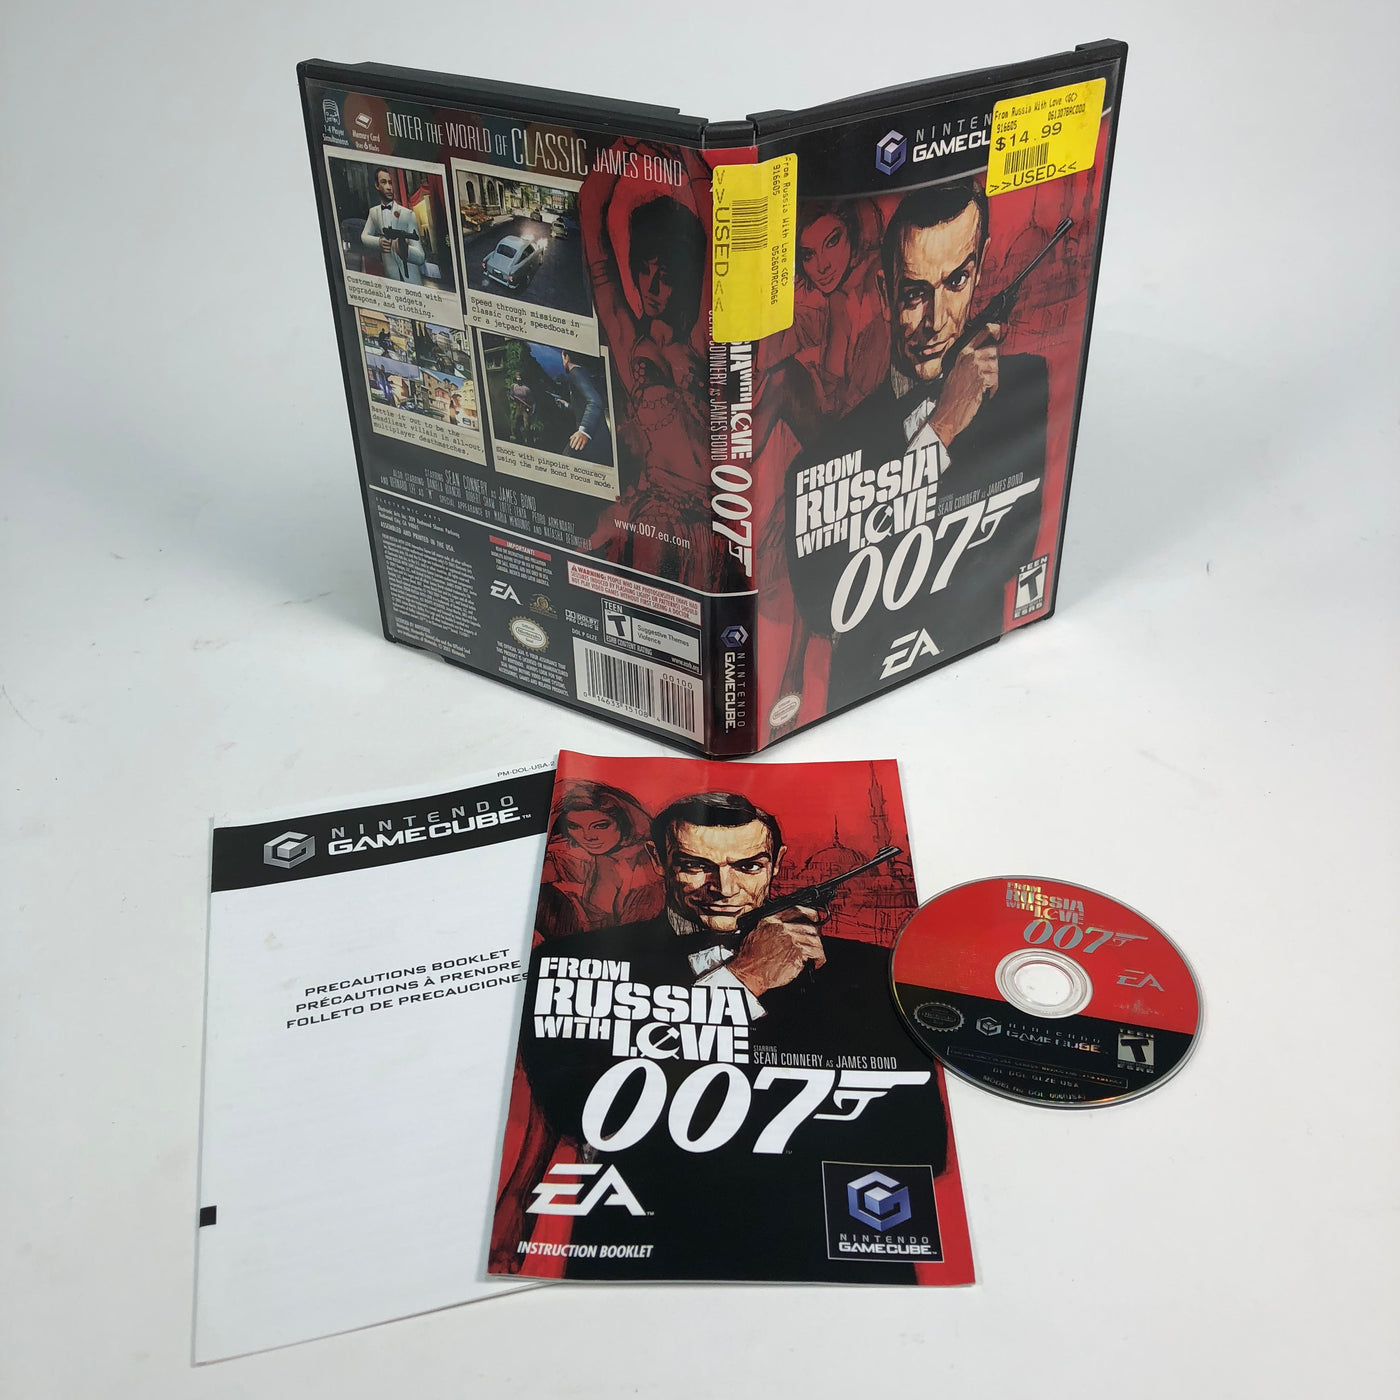 007 from russia with love gamecube